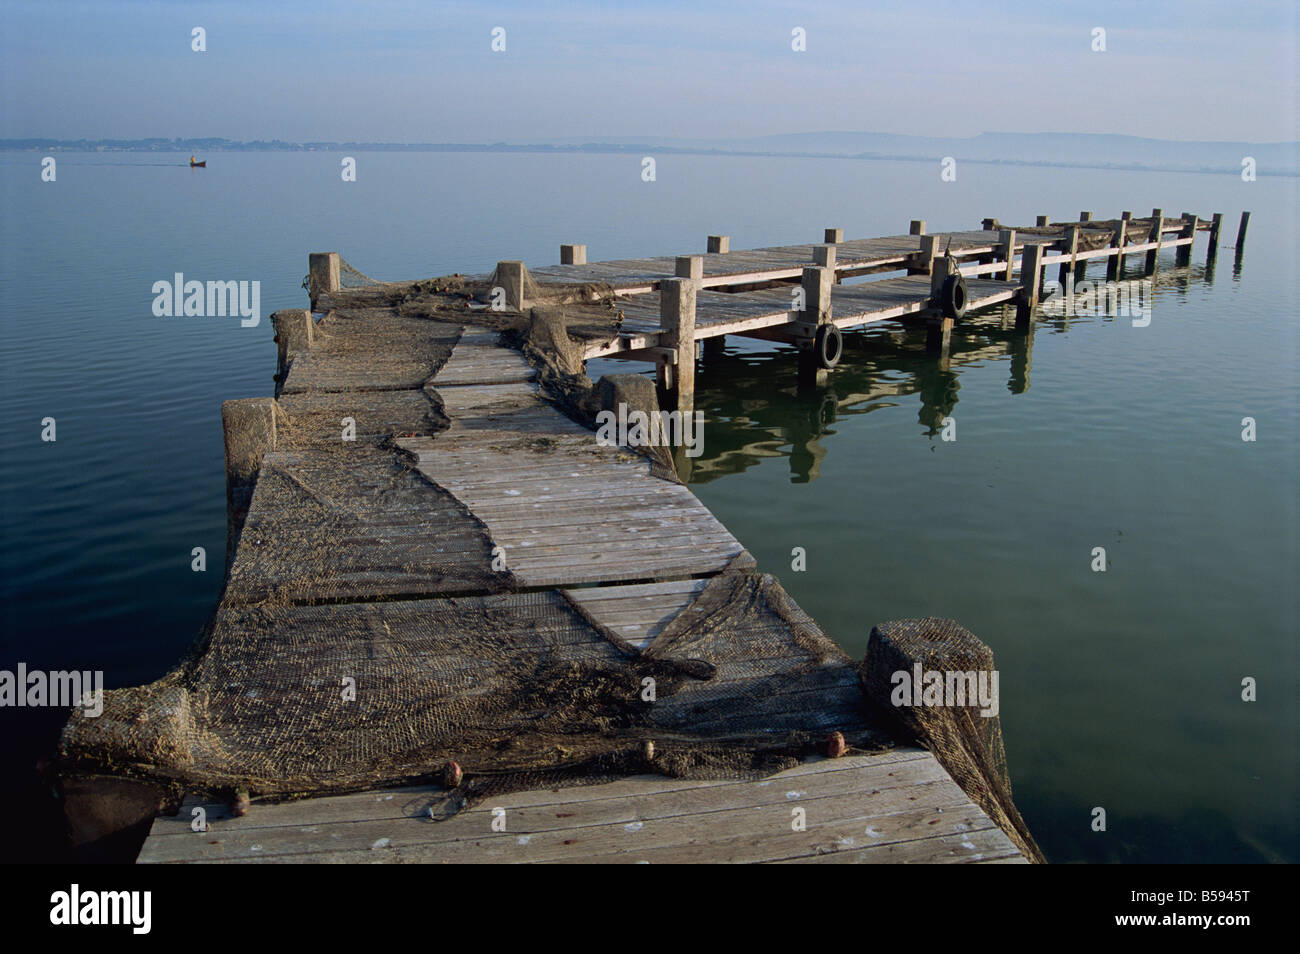 https://c8.alamy.com/comp/B5945T/fishing-nets-on-a-wooden-jetty-at-etang-de-bages-near-narbonne-languedoc-B5945T.jpg